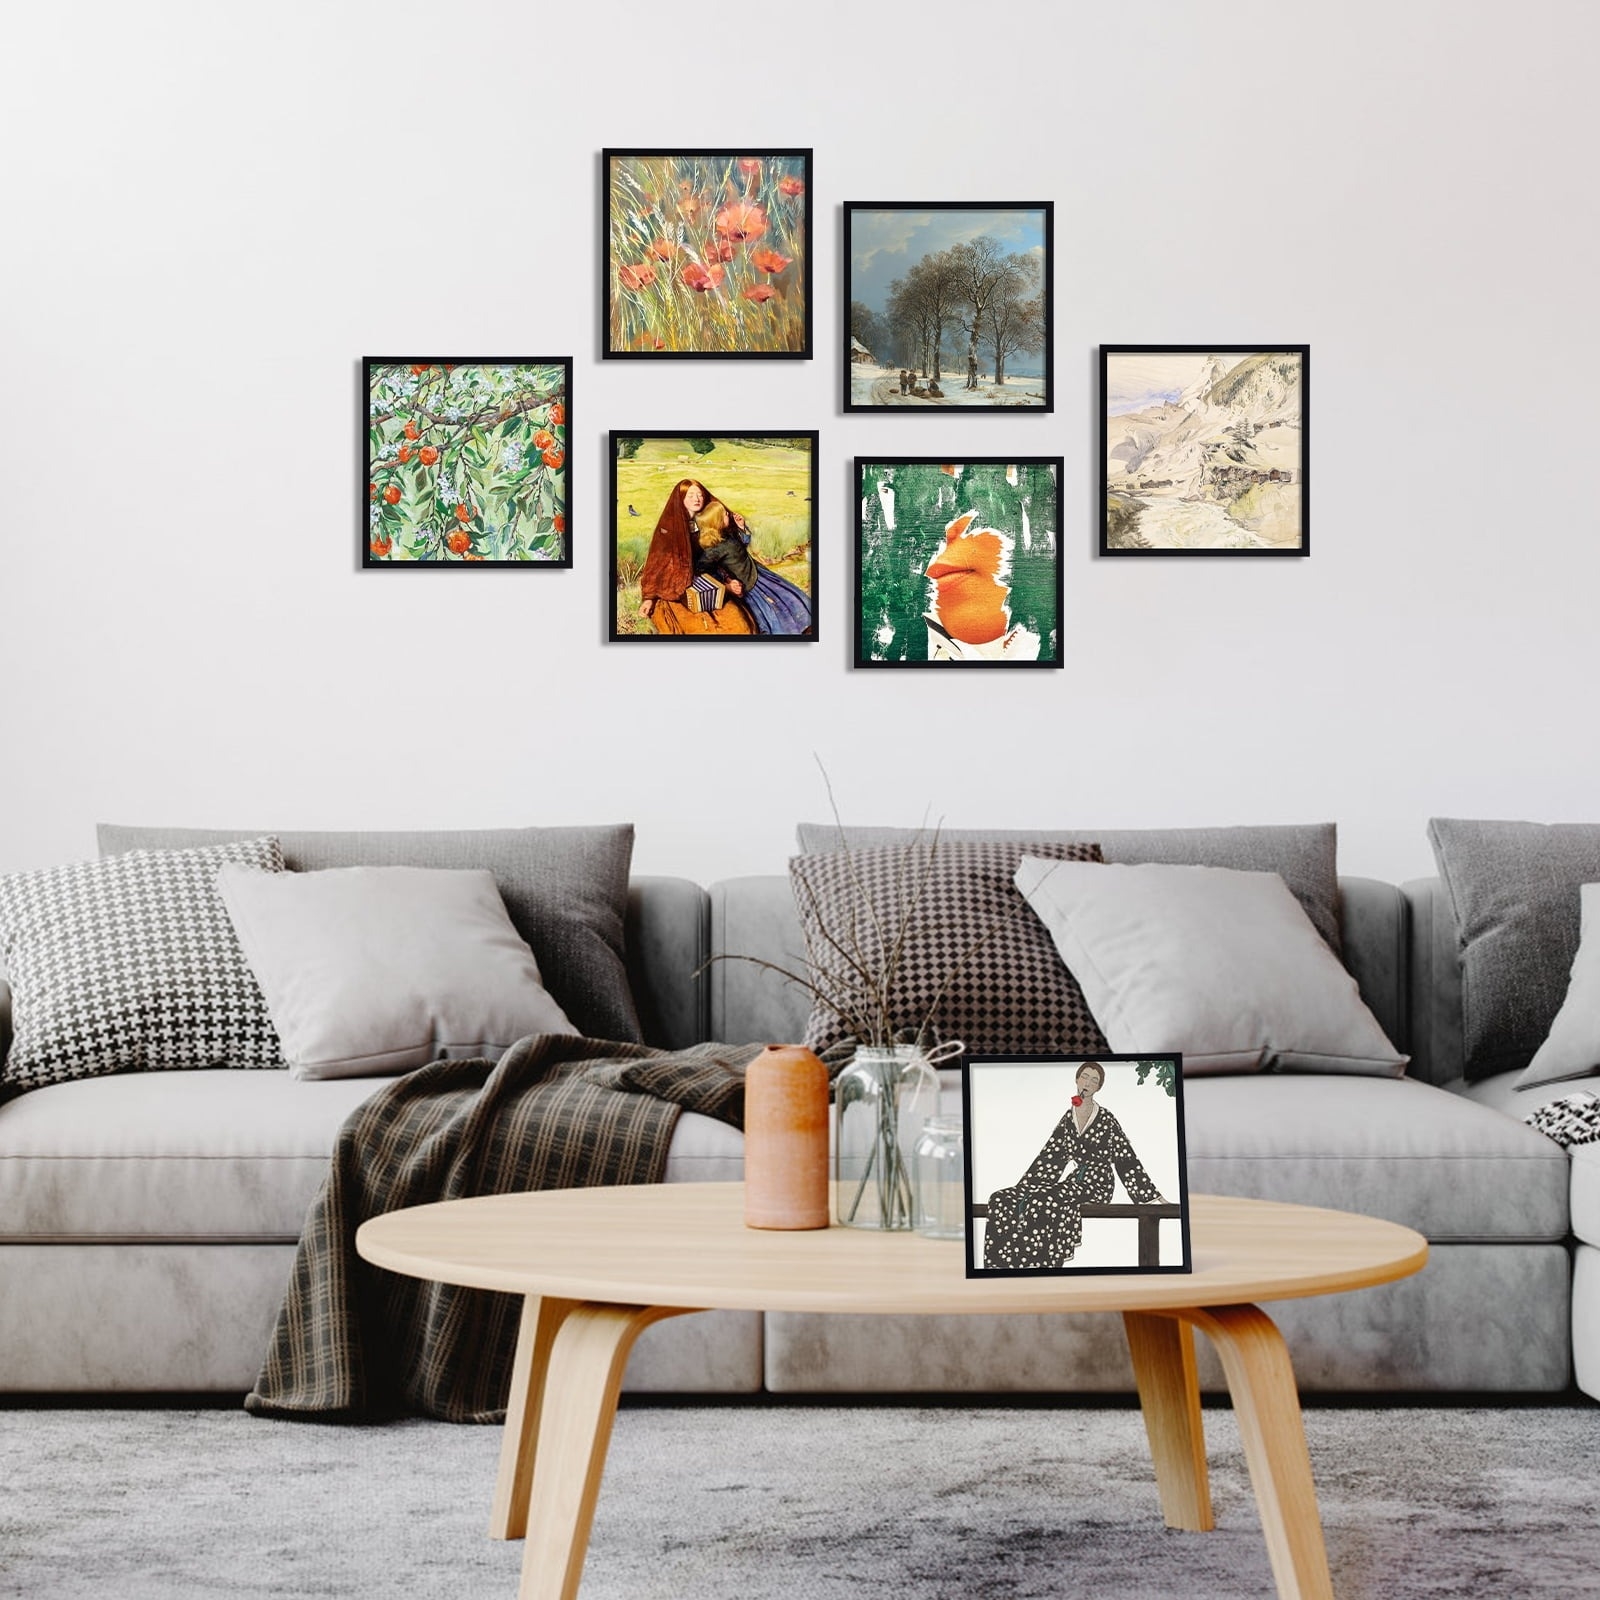 frames above a couch